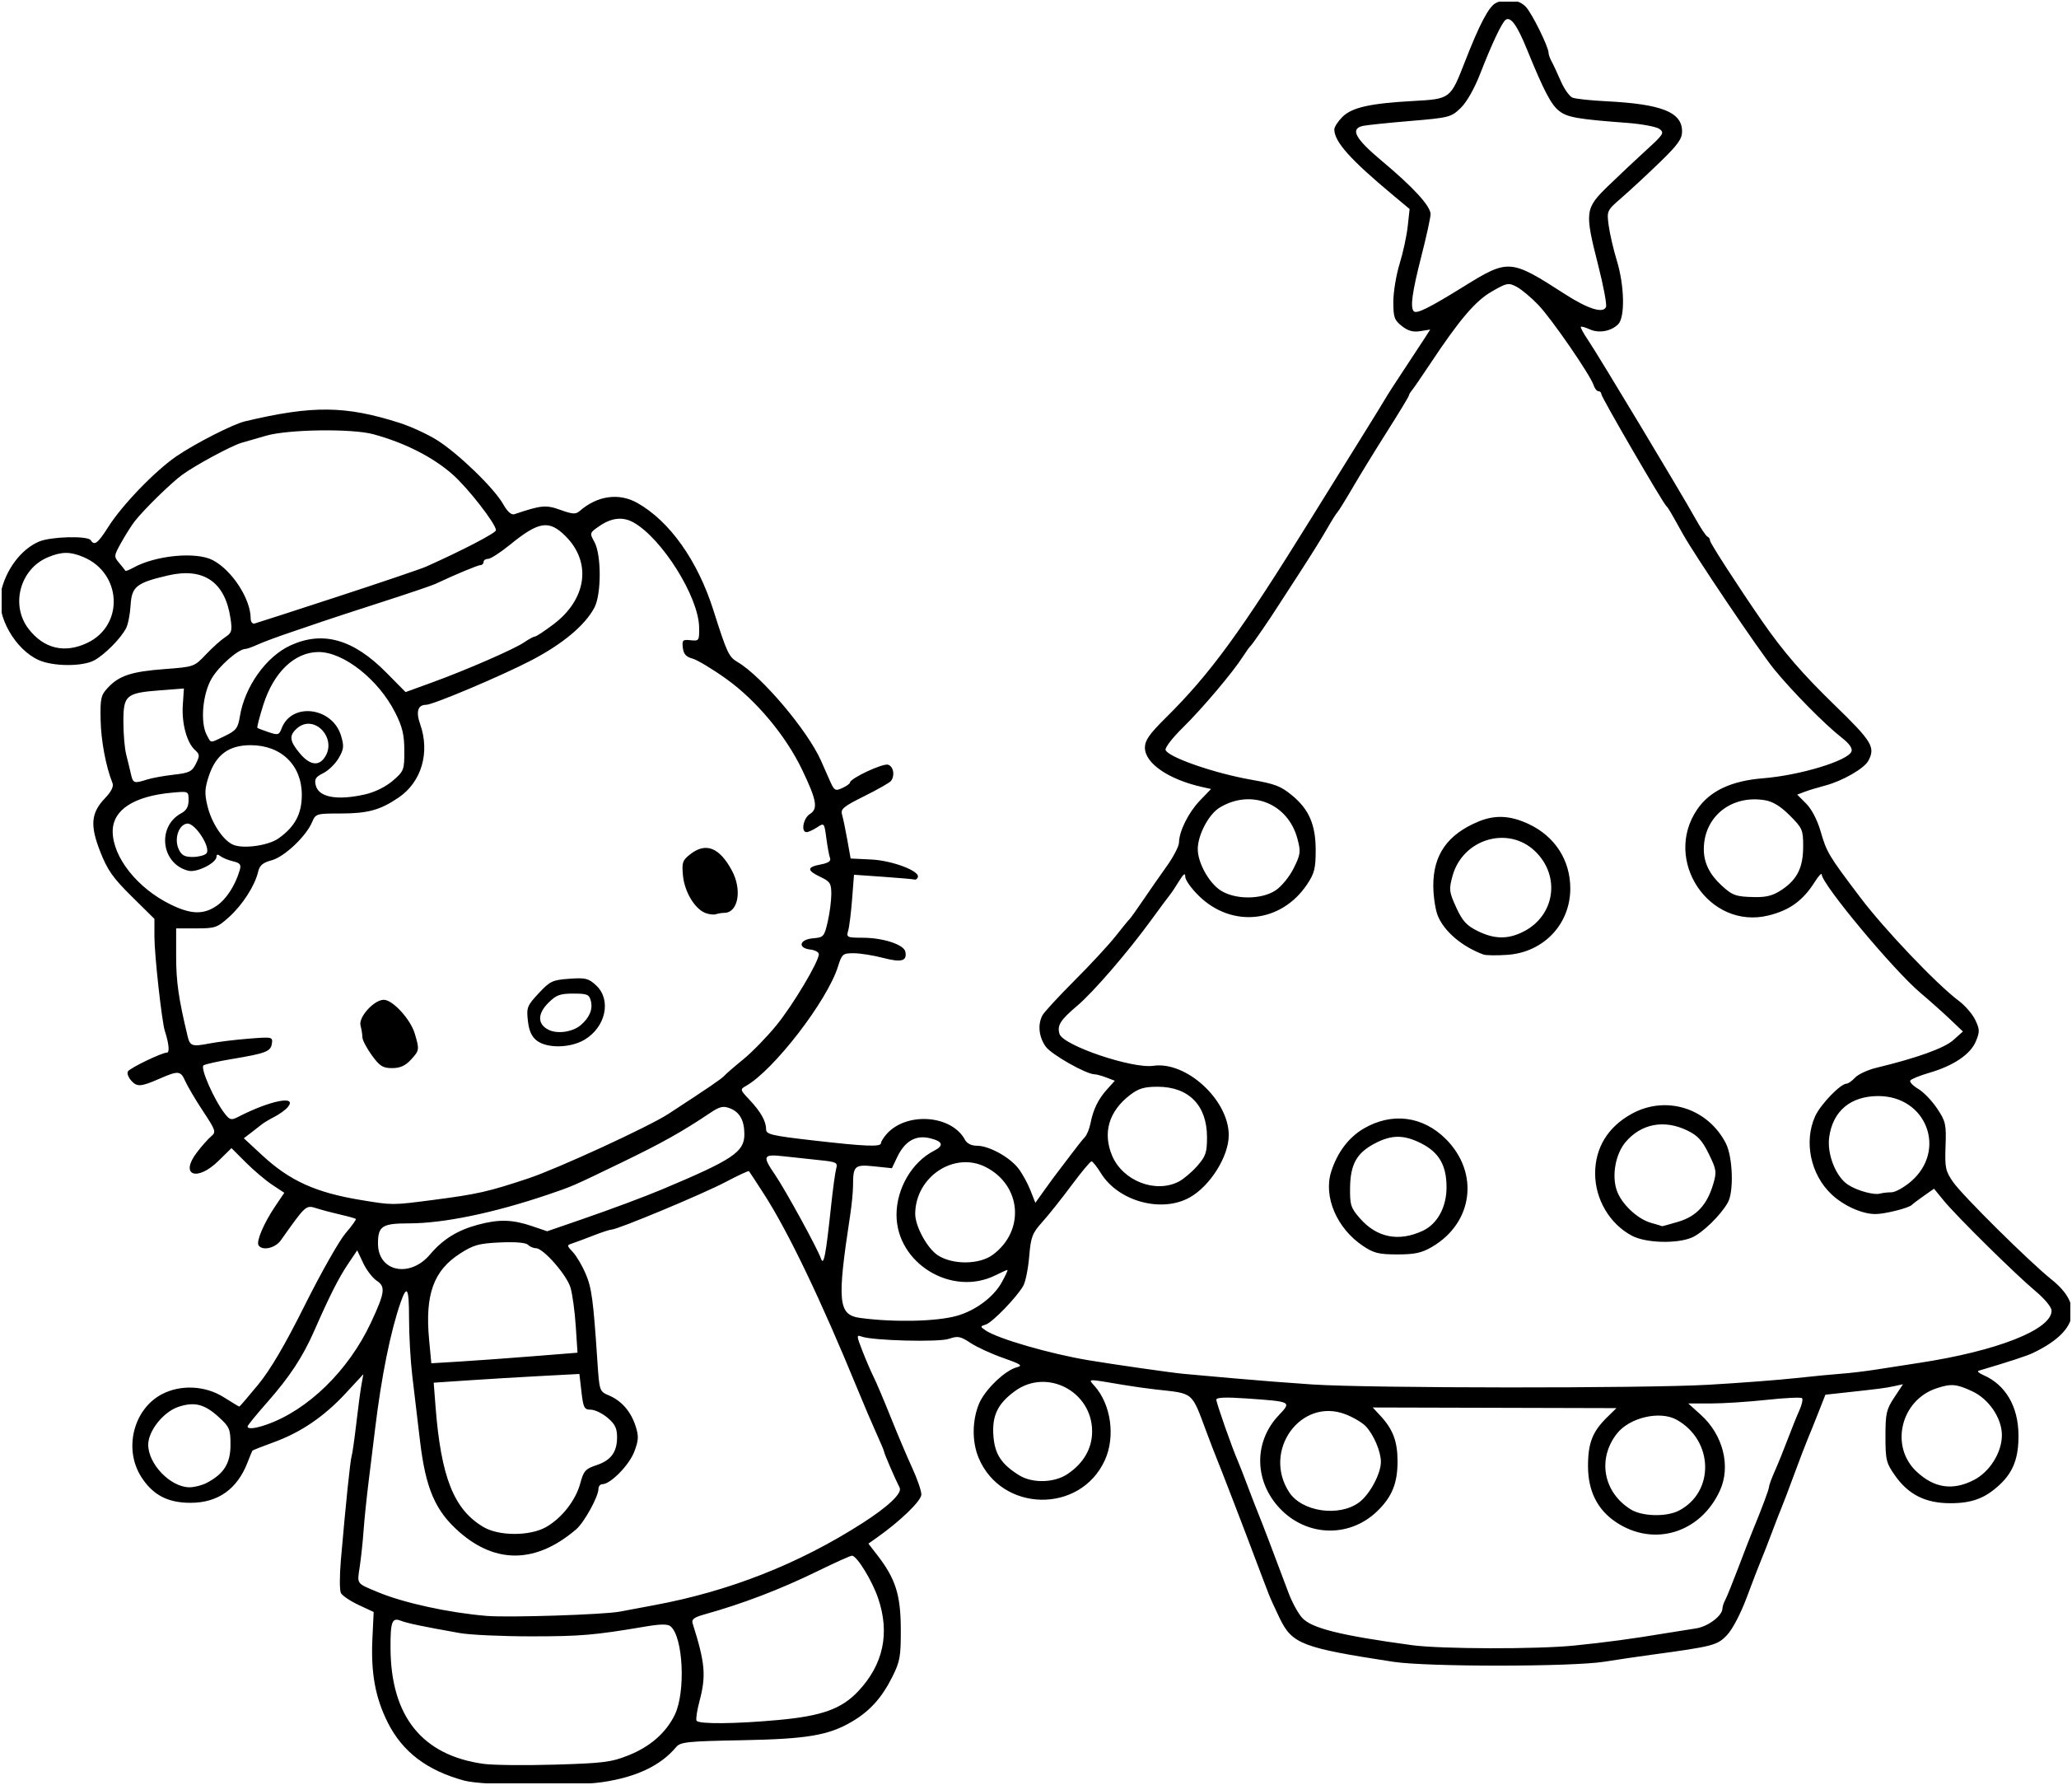 coloriage hello kitty a imprimer princesse ancenscp in coloriage kitty imprimer